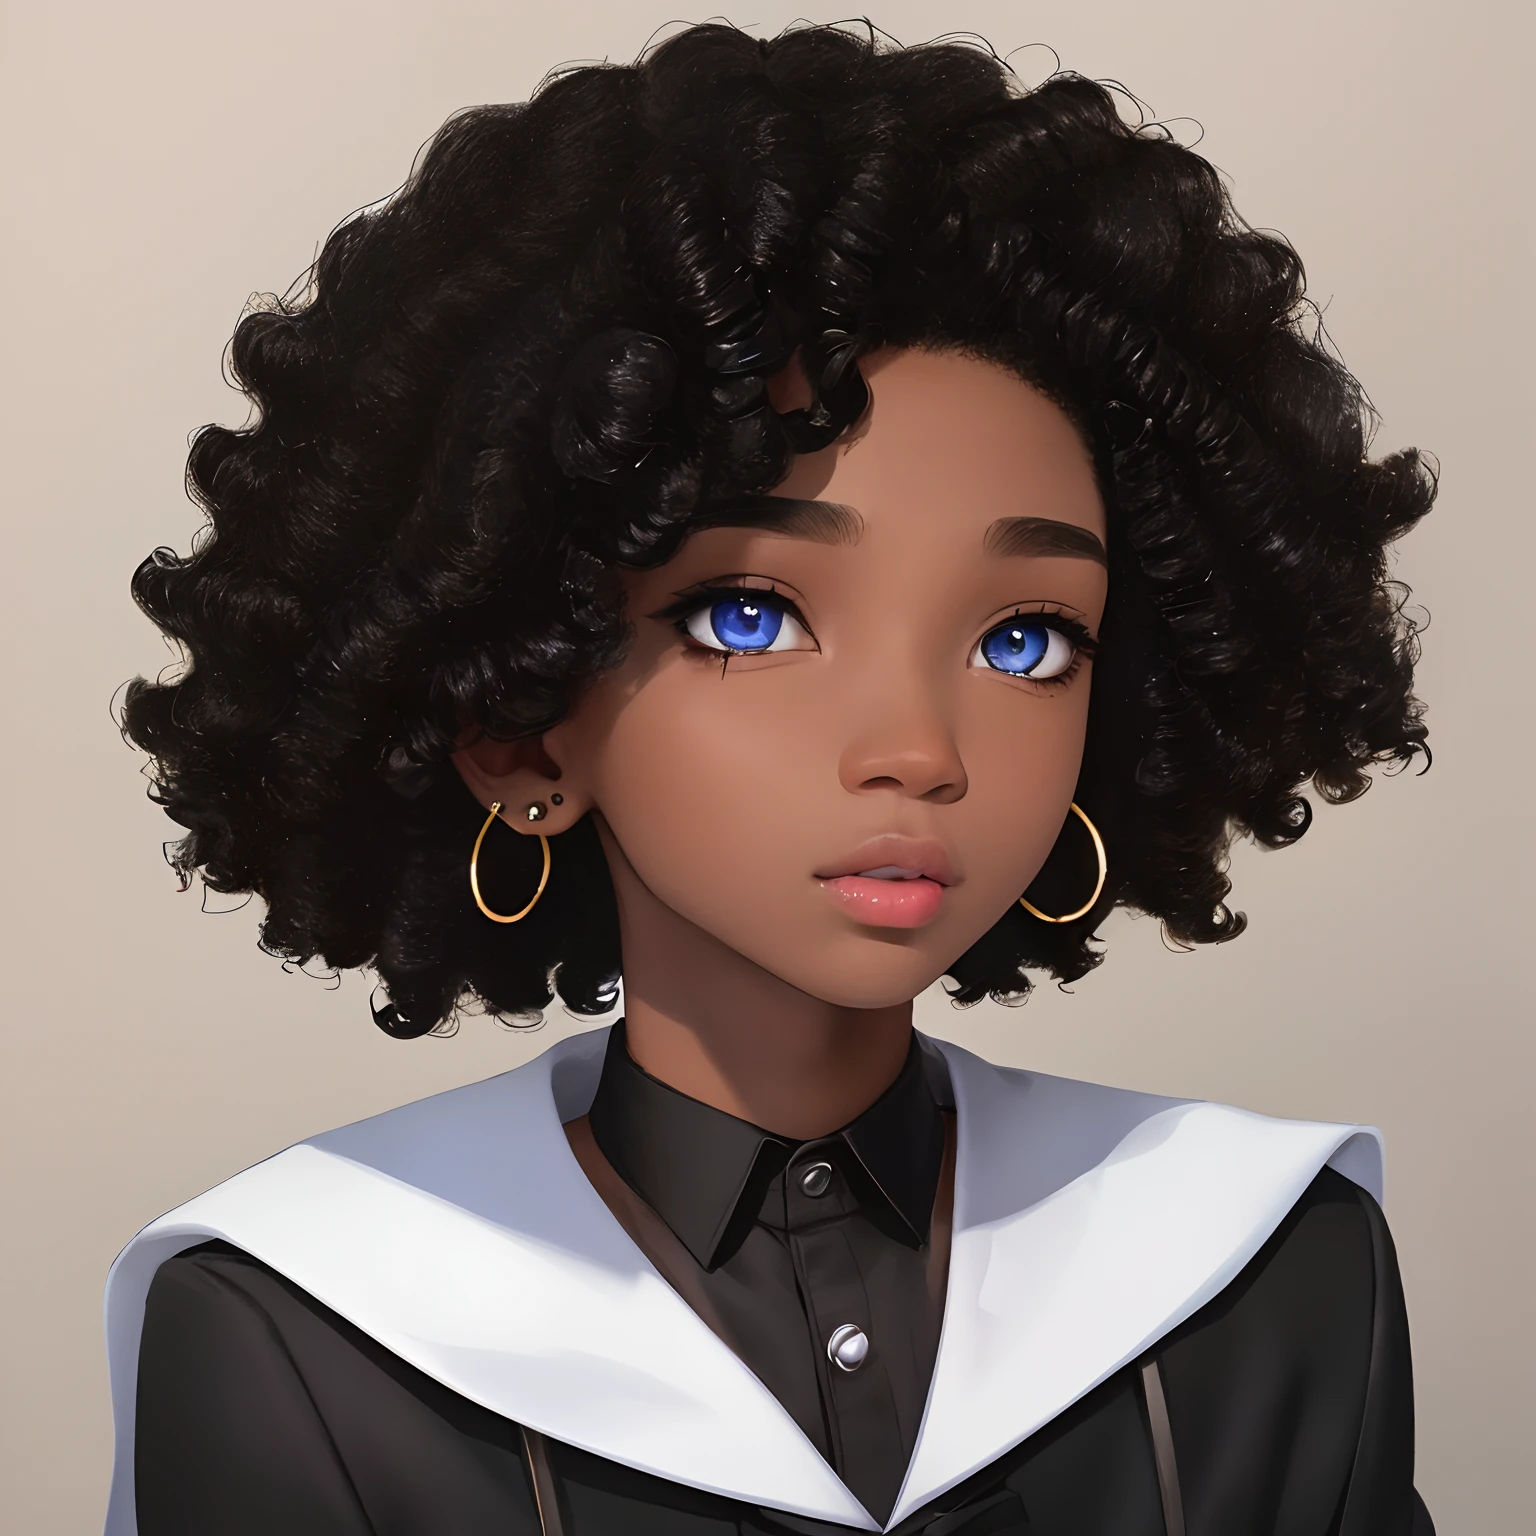 young boy, androgynous male, dark skin, shiny blue eyes, school outfit, black curly hair, wide nose, full lips, drop bar earrings, cute face, perfect, anime